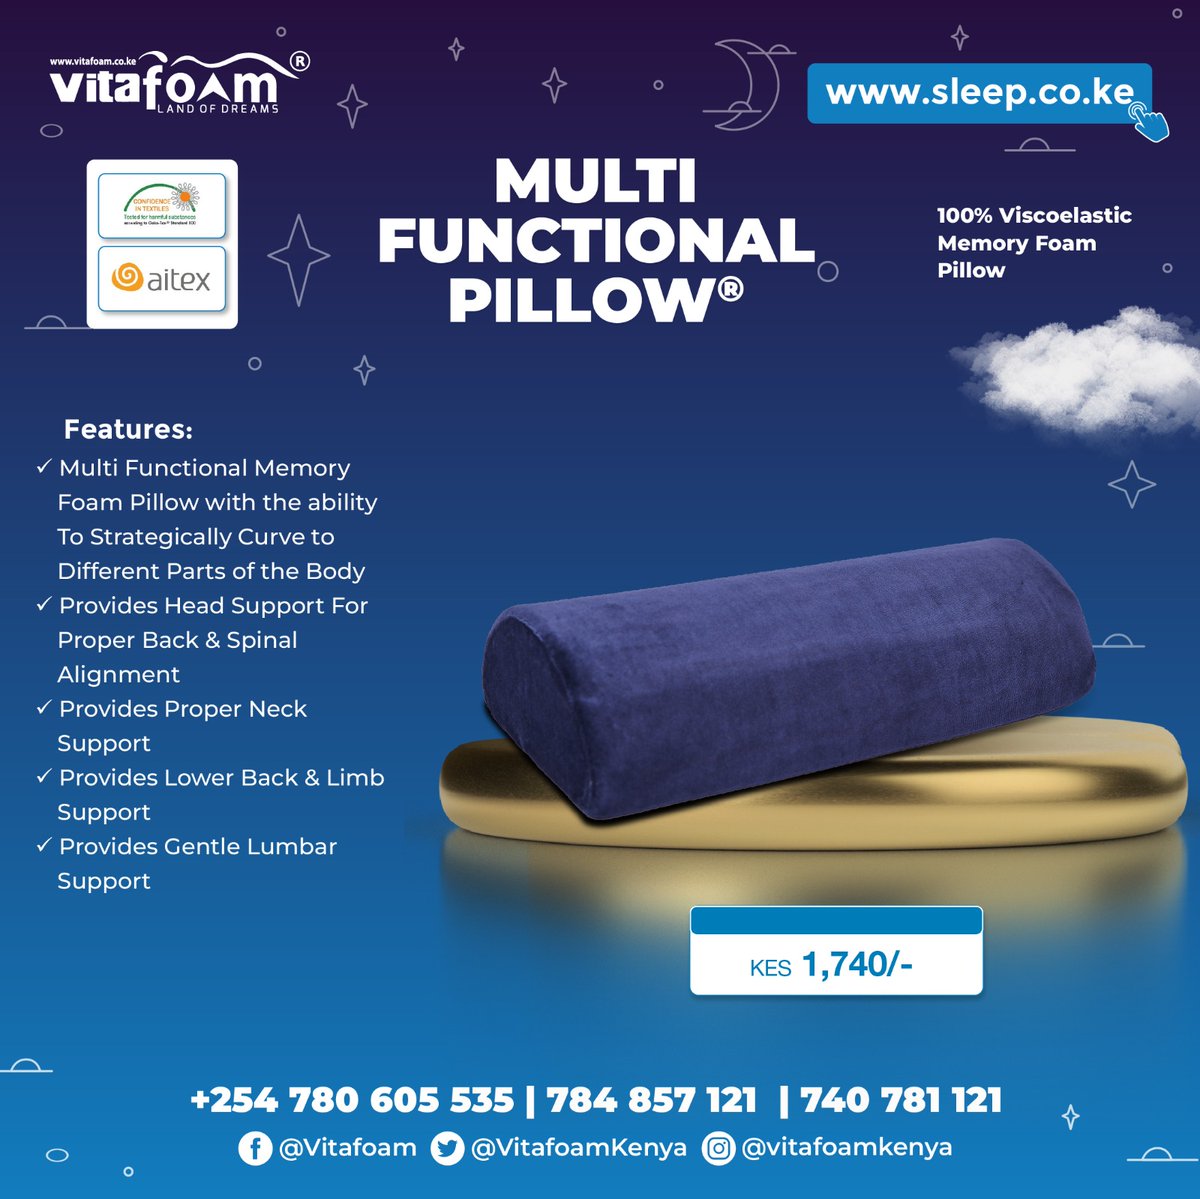 🌟🤗☁️🙋‍♂️ The Versatile Multi-Functional Memory Foam Pillow Available only at #VitaFoamKenya®! 🙋‍♀️☁️🤗🌟 ☎ For All *Pillow, *Mattress, *Bed & *Sleep Accessory Enquiries, Orders & Deliveries: +254 780 605 535 | 740 781 121 📍 Our Locations: bit.ly/30VqOrf